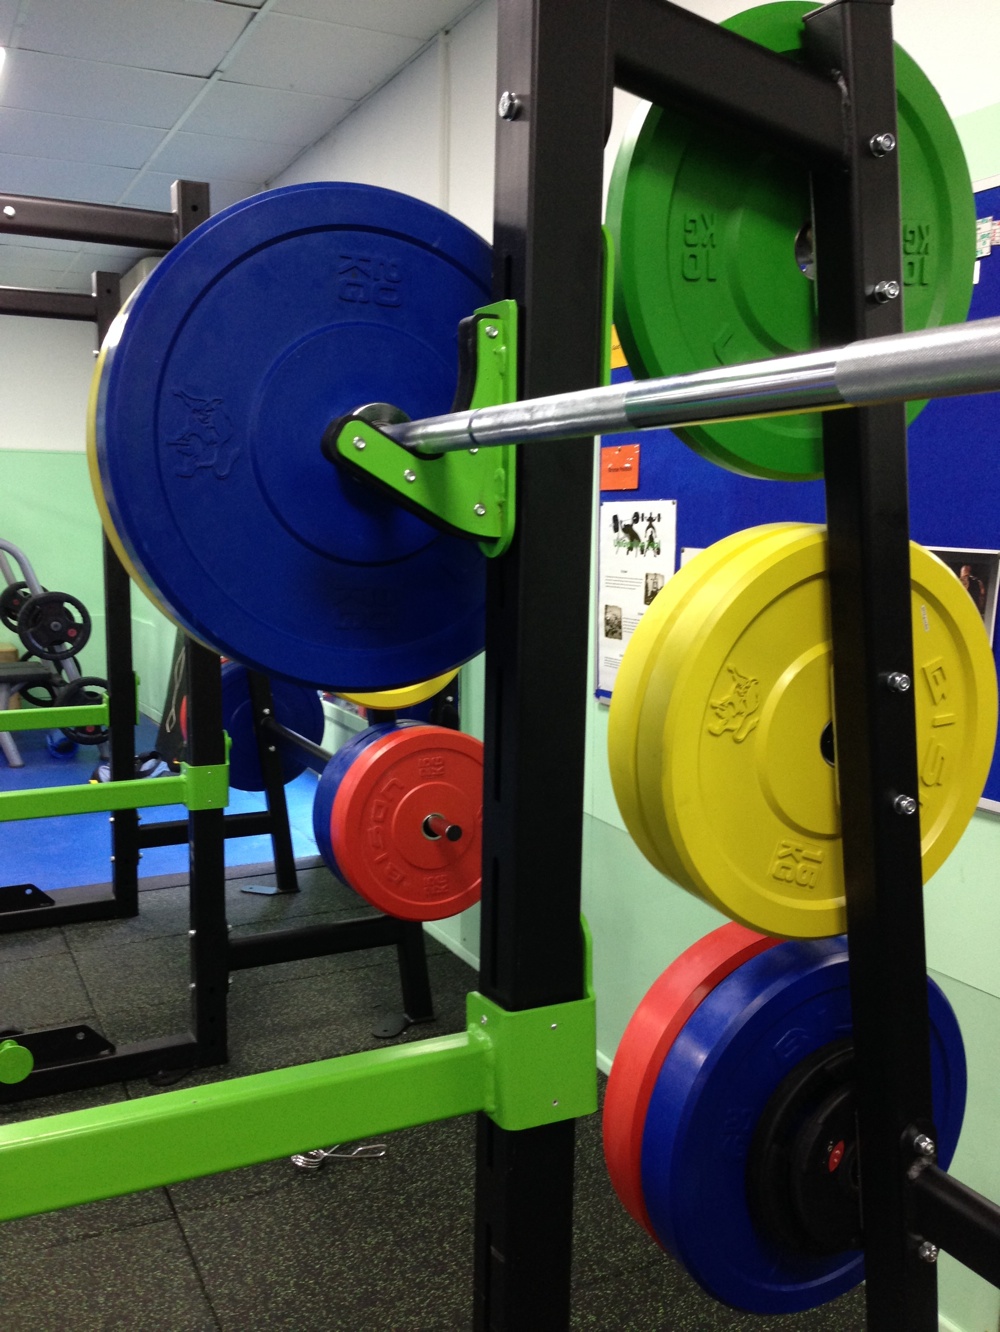 We got some pretty new squat racks in the gym in time for my PB attempt. Nice, eh?